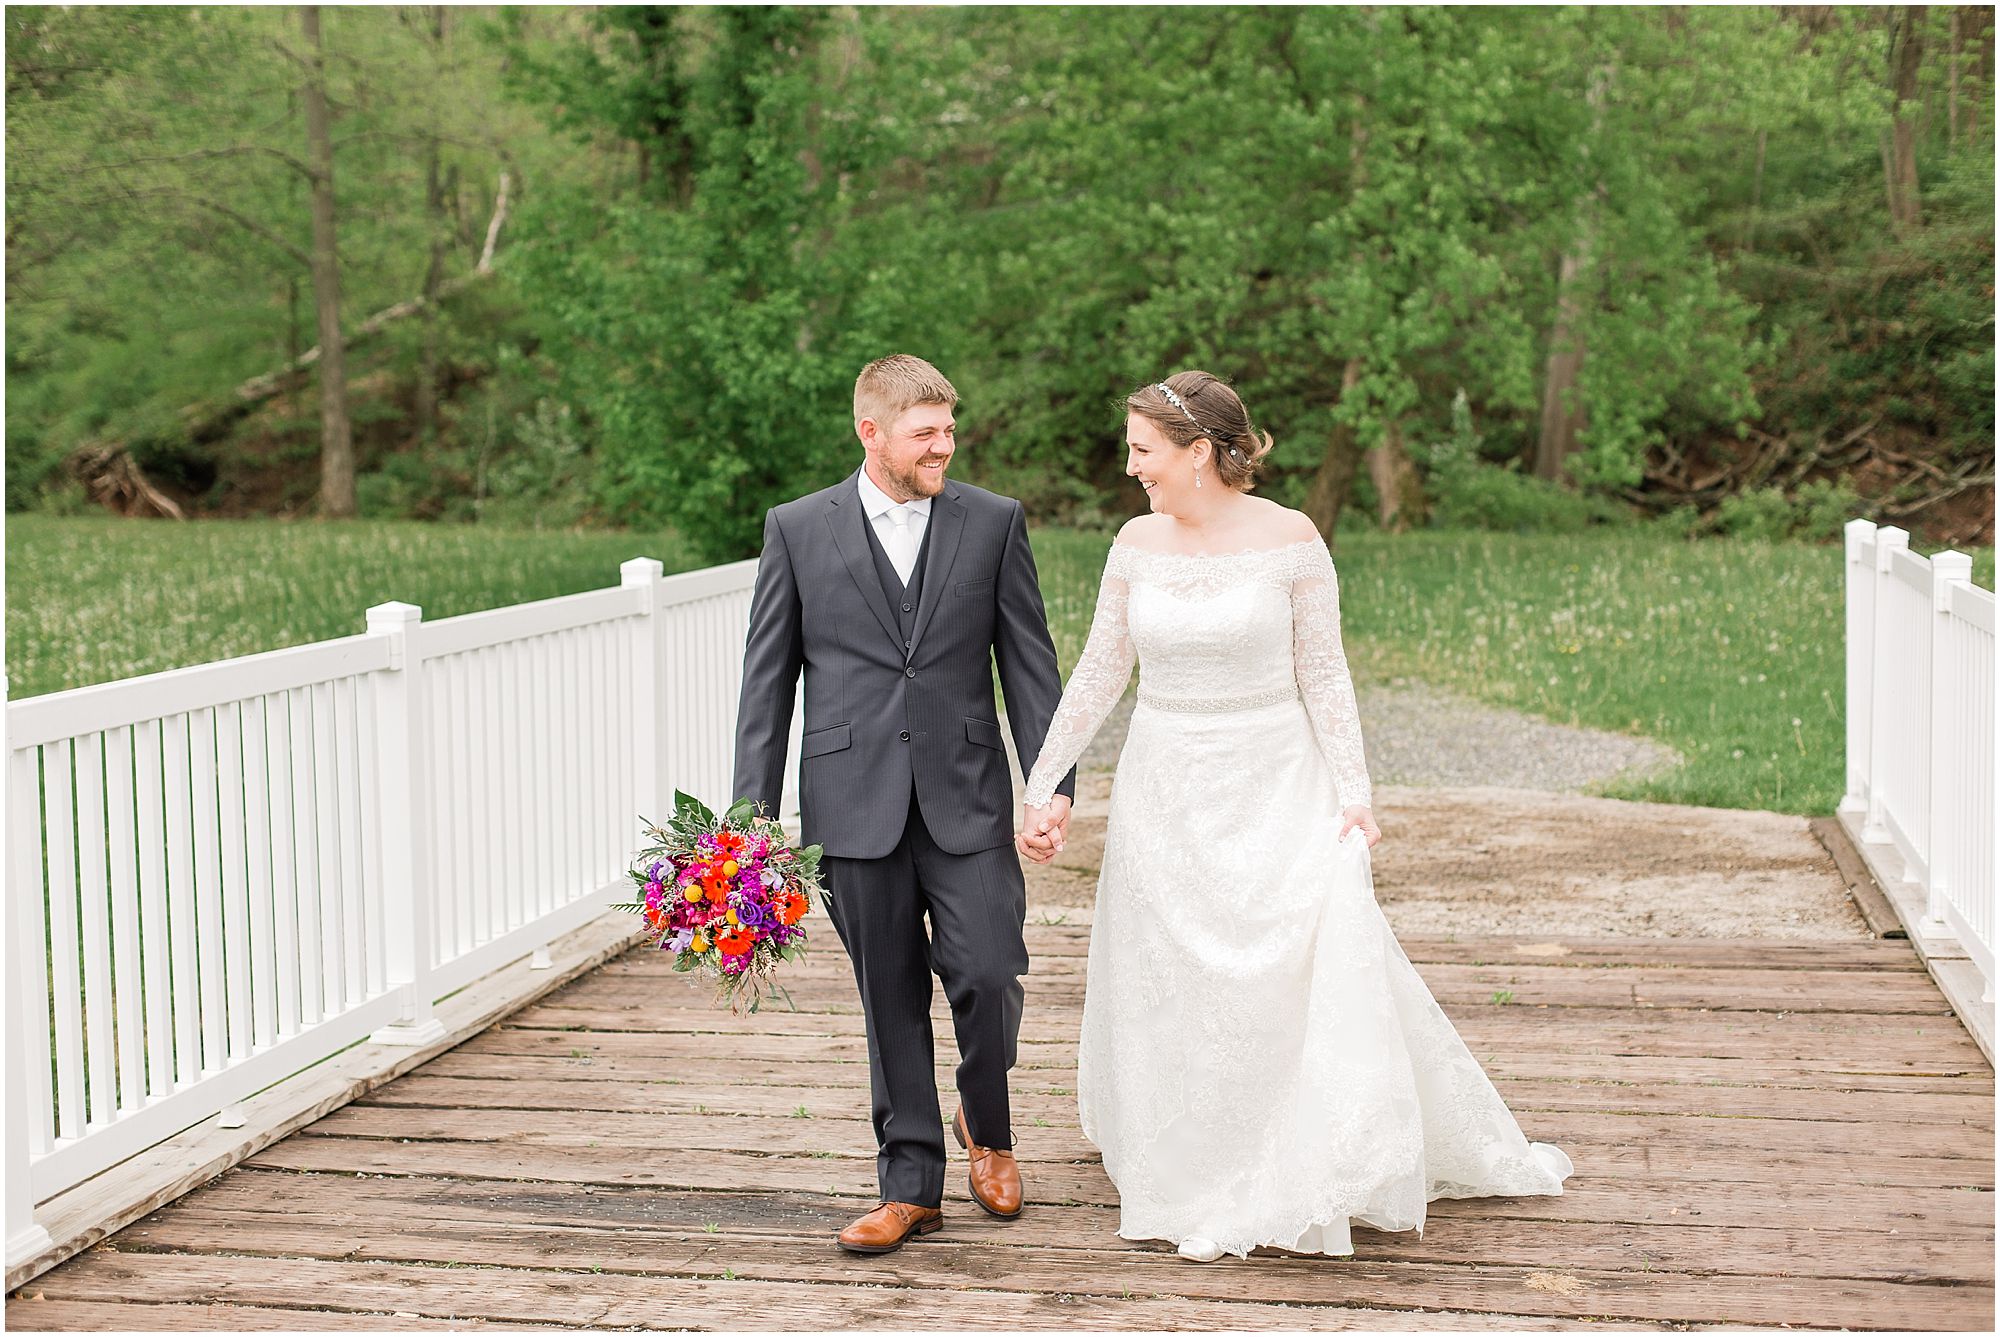 A Colorful Rustic Wedding At The Barn on Bridge In Collegeville, PA Photos